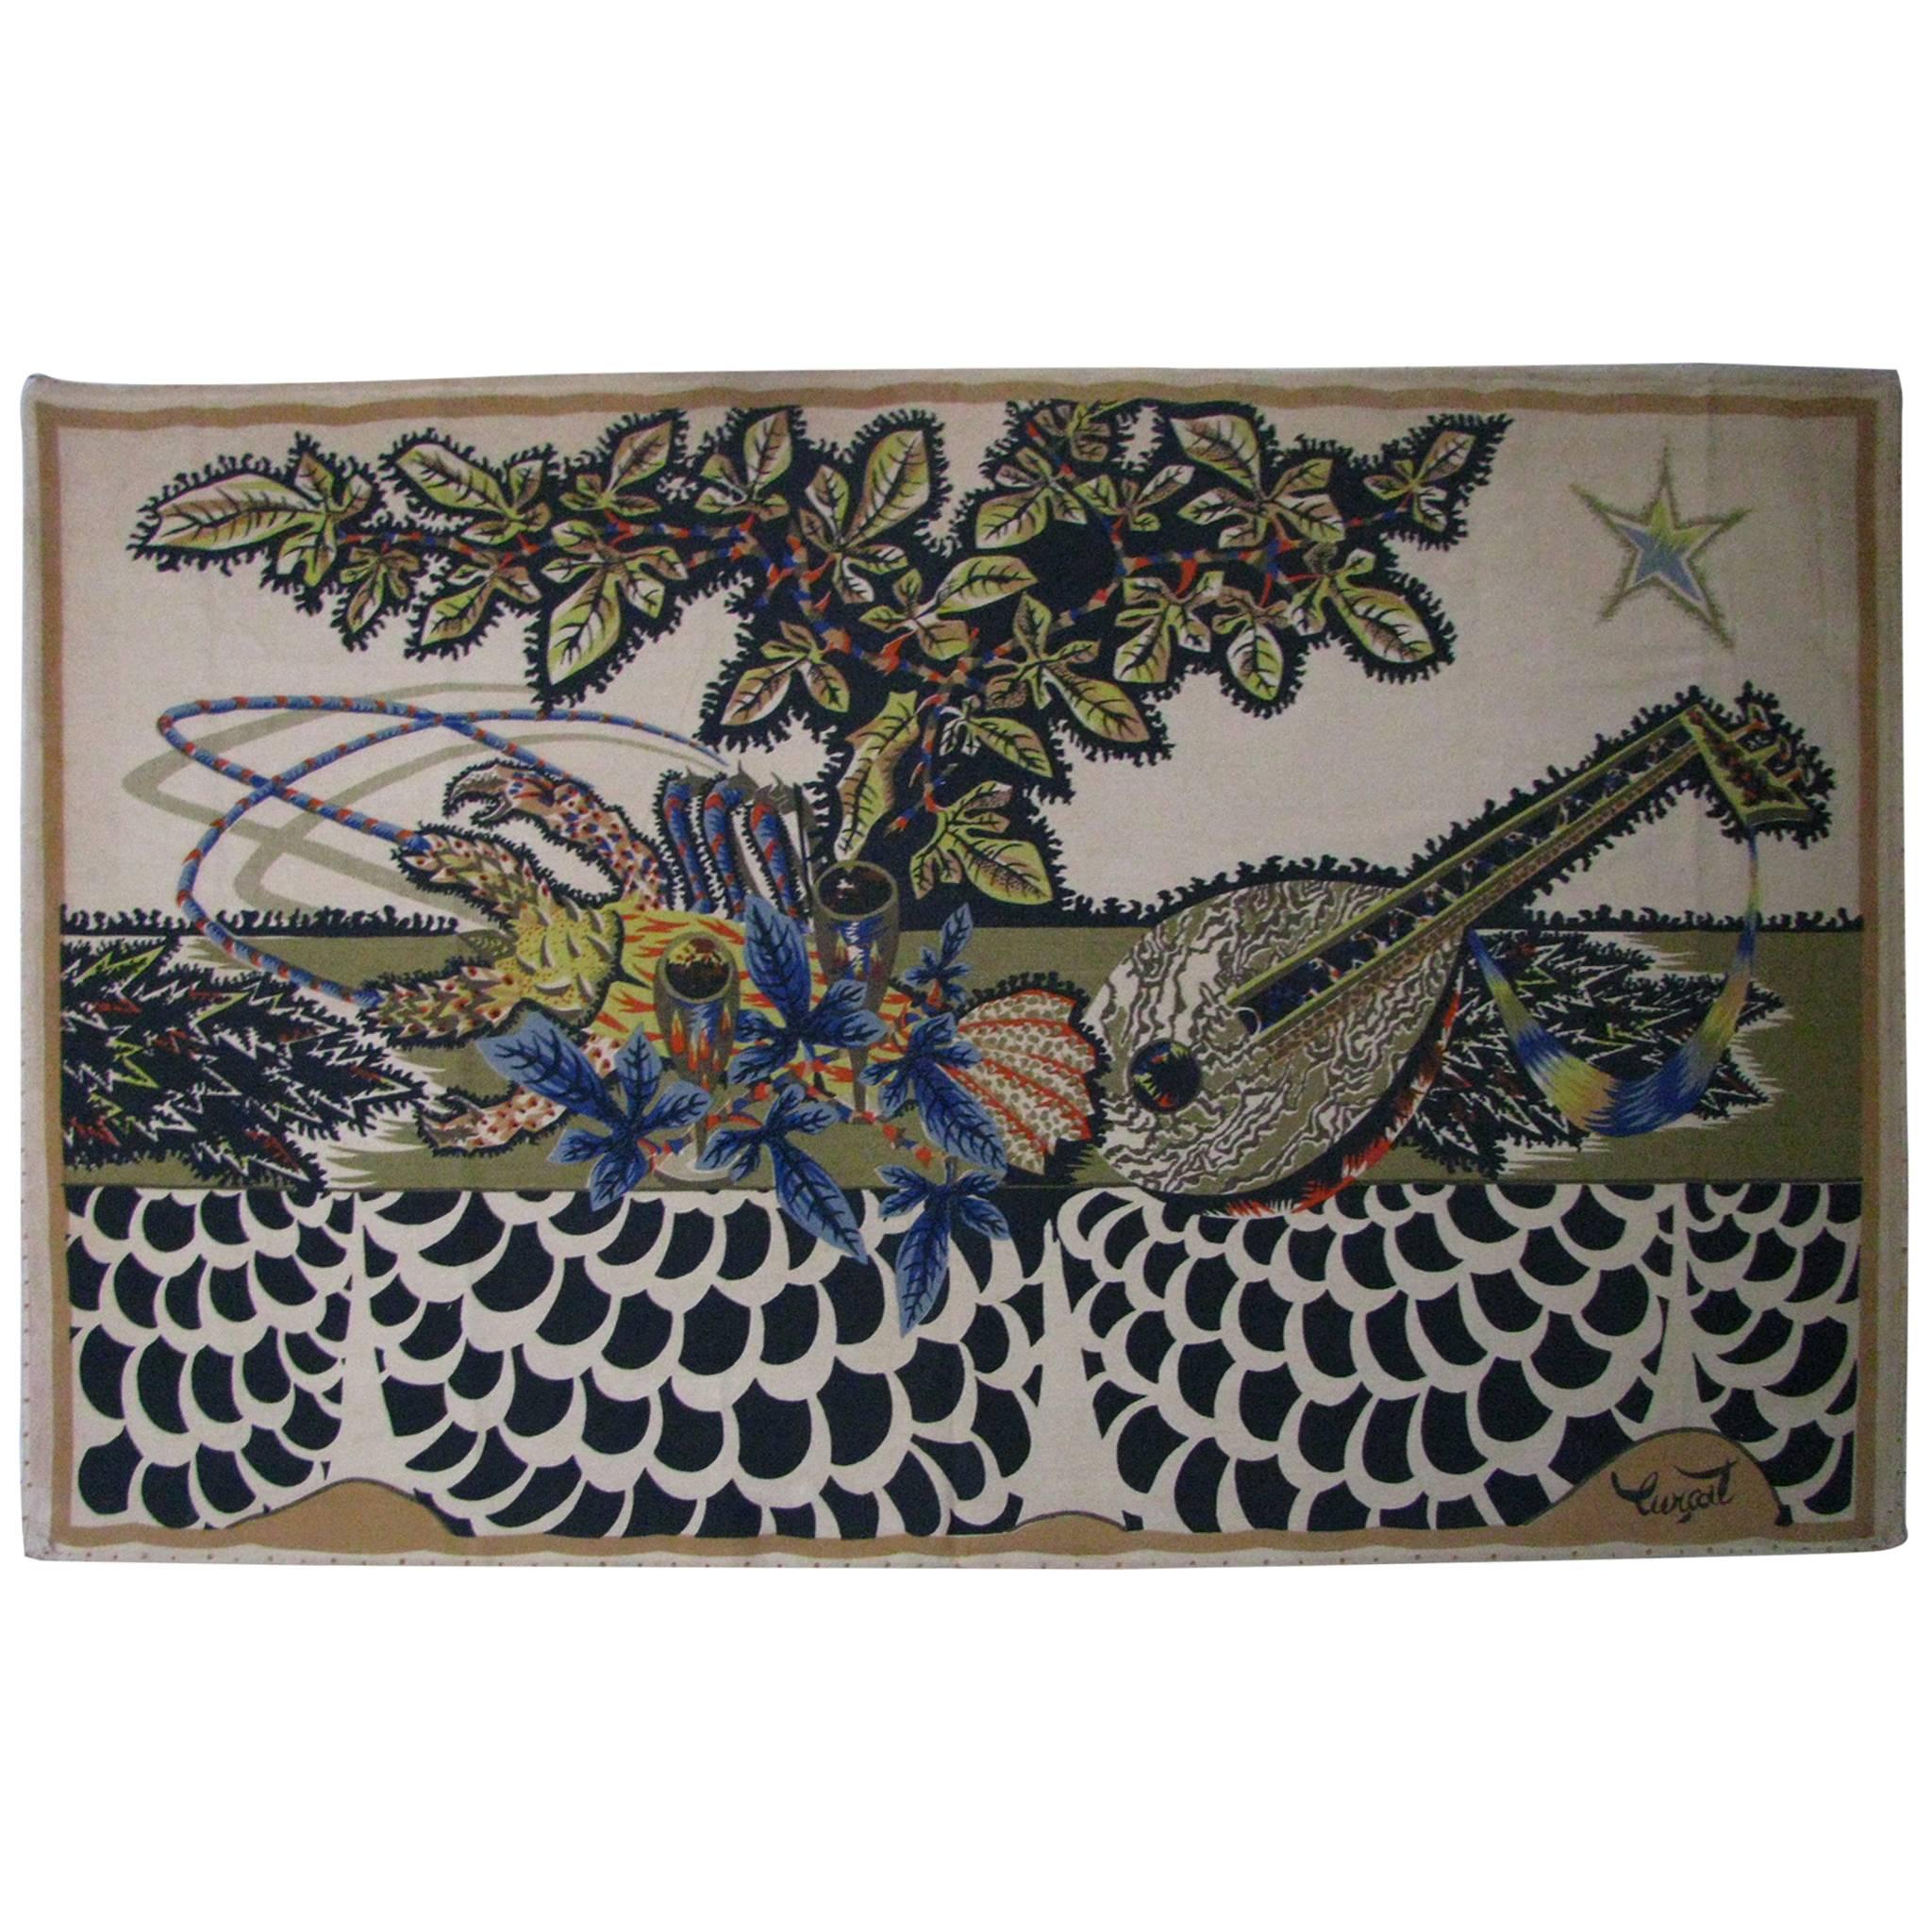 French Midcentury Tapestry by Jean Lurcat for Corot